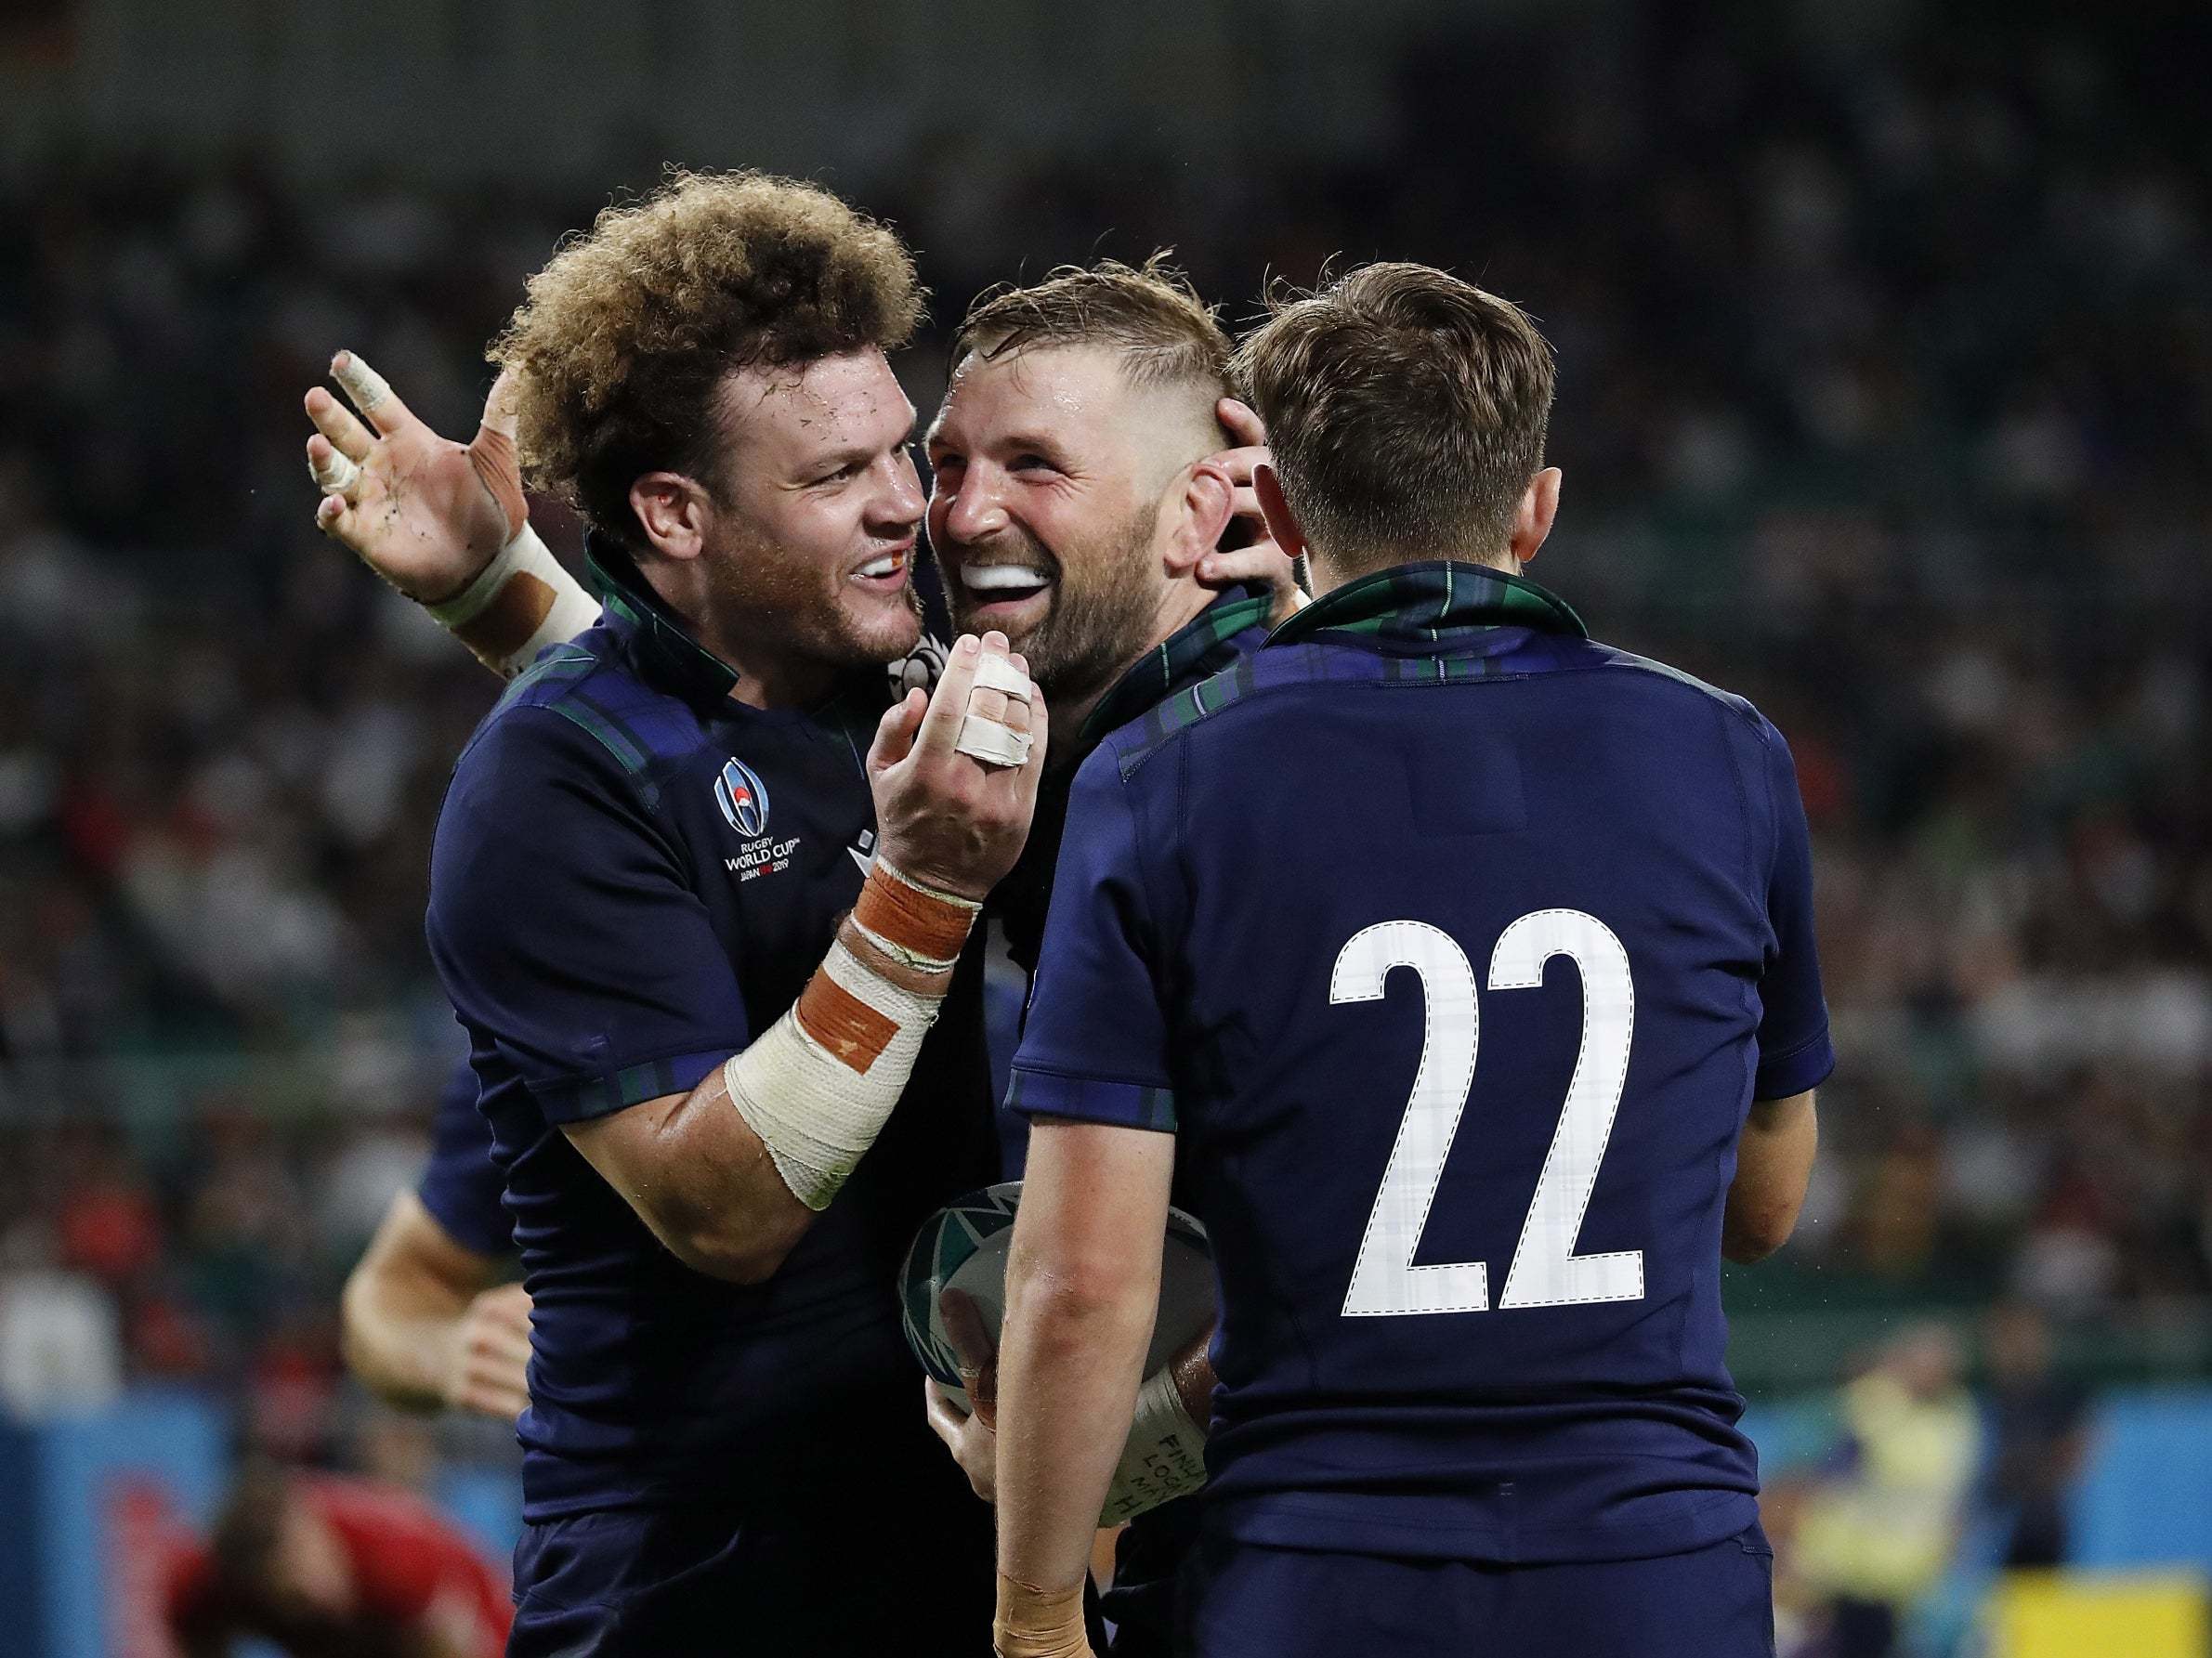 Rugby World Cup 2019: Scotland thrash Russia in nine-try whitewash to set up Japan showdown